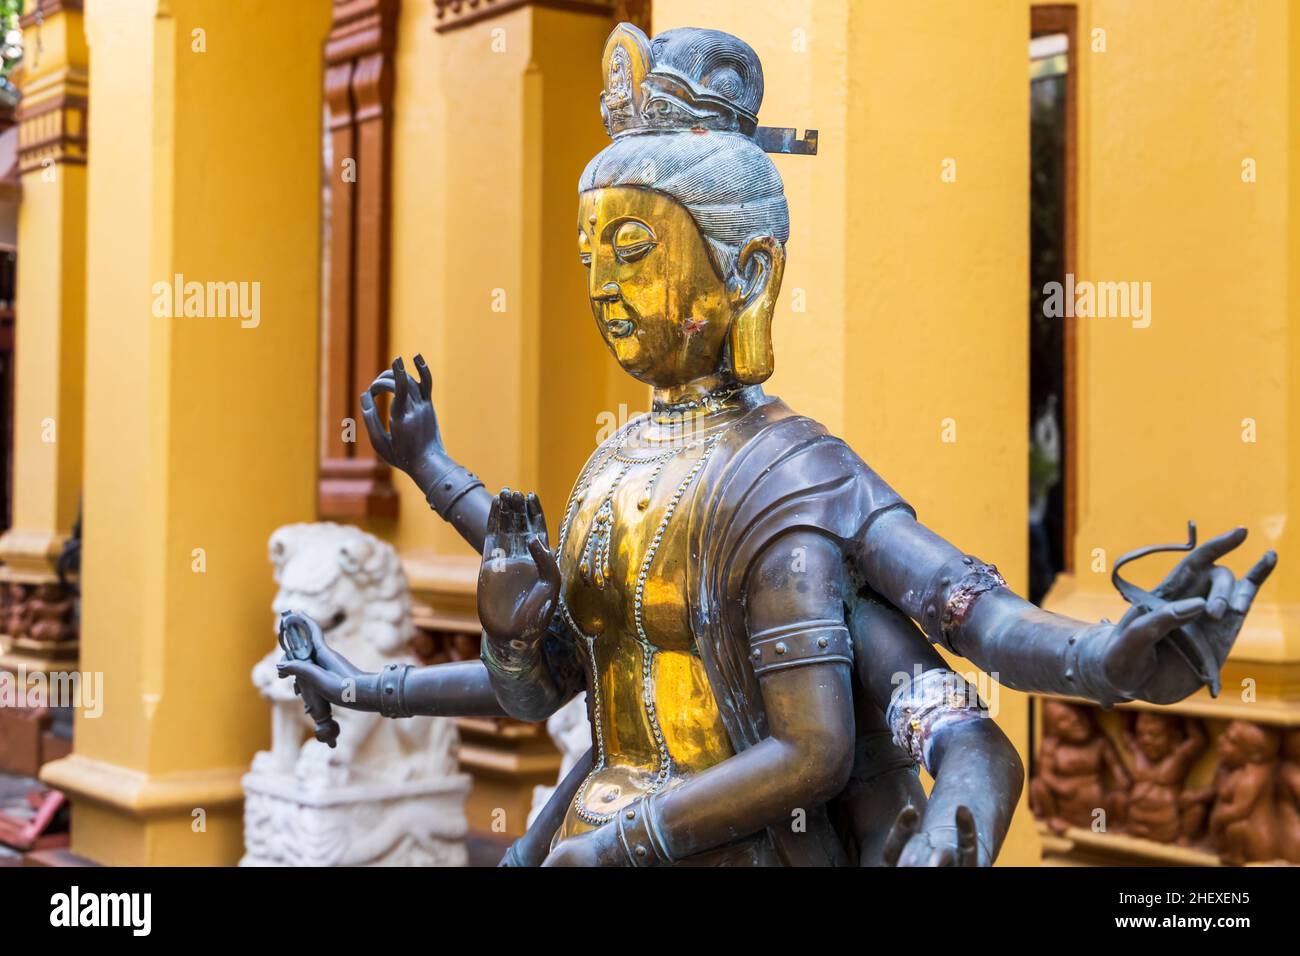 Decoration of Buddhist temple. Ancient statue of Guanyin, Guan Yin or Kuan Yin. It is the Buddhist bodhisattva associated with compassion Stock Photo